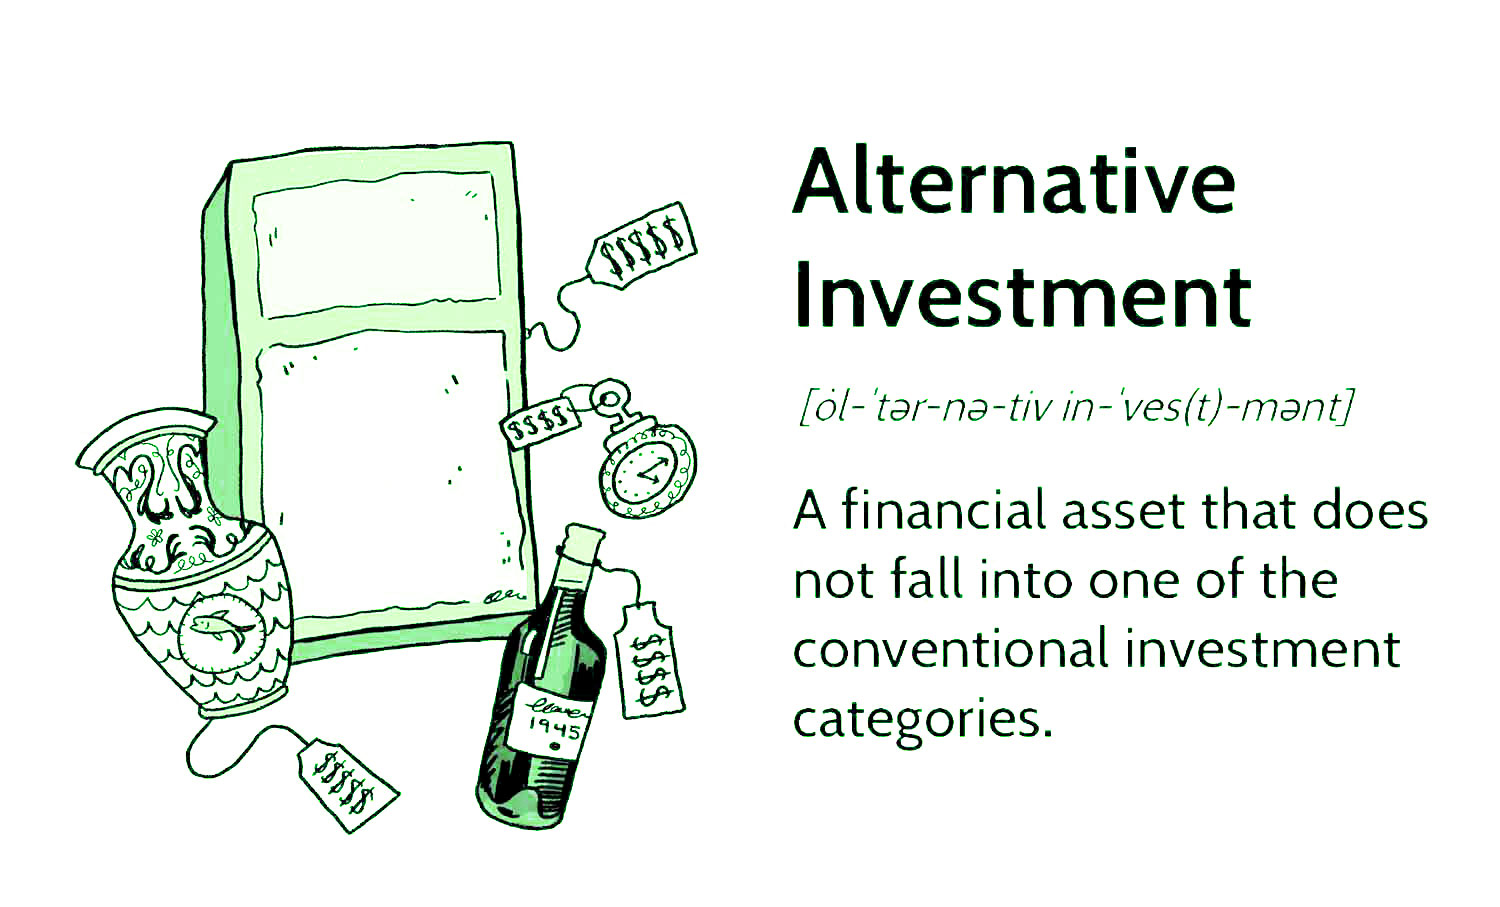 The Place for Alternative Investments in Your Portfolio